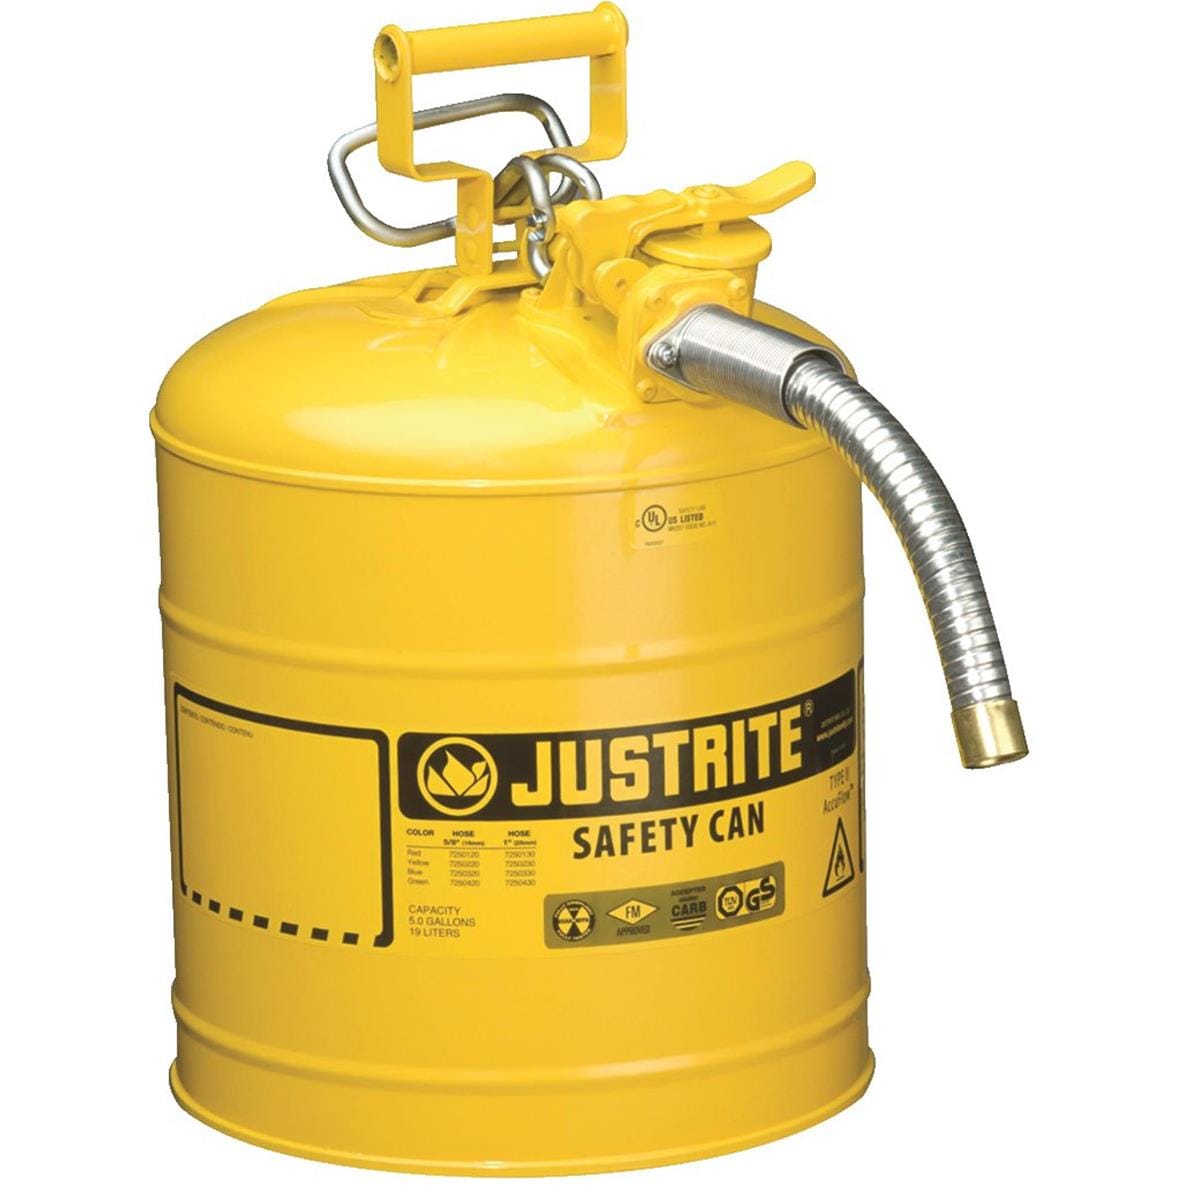 Justrite Type II AccuFlow Safety Can, 5 gal.